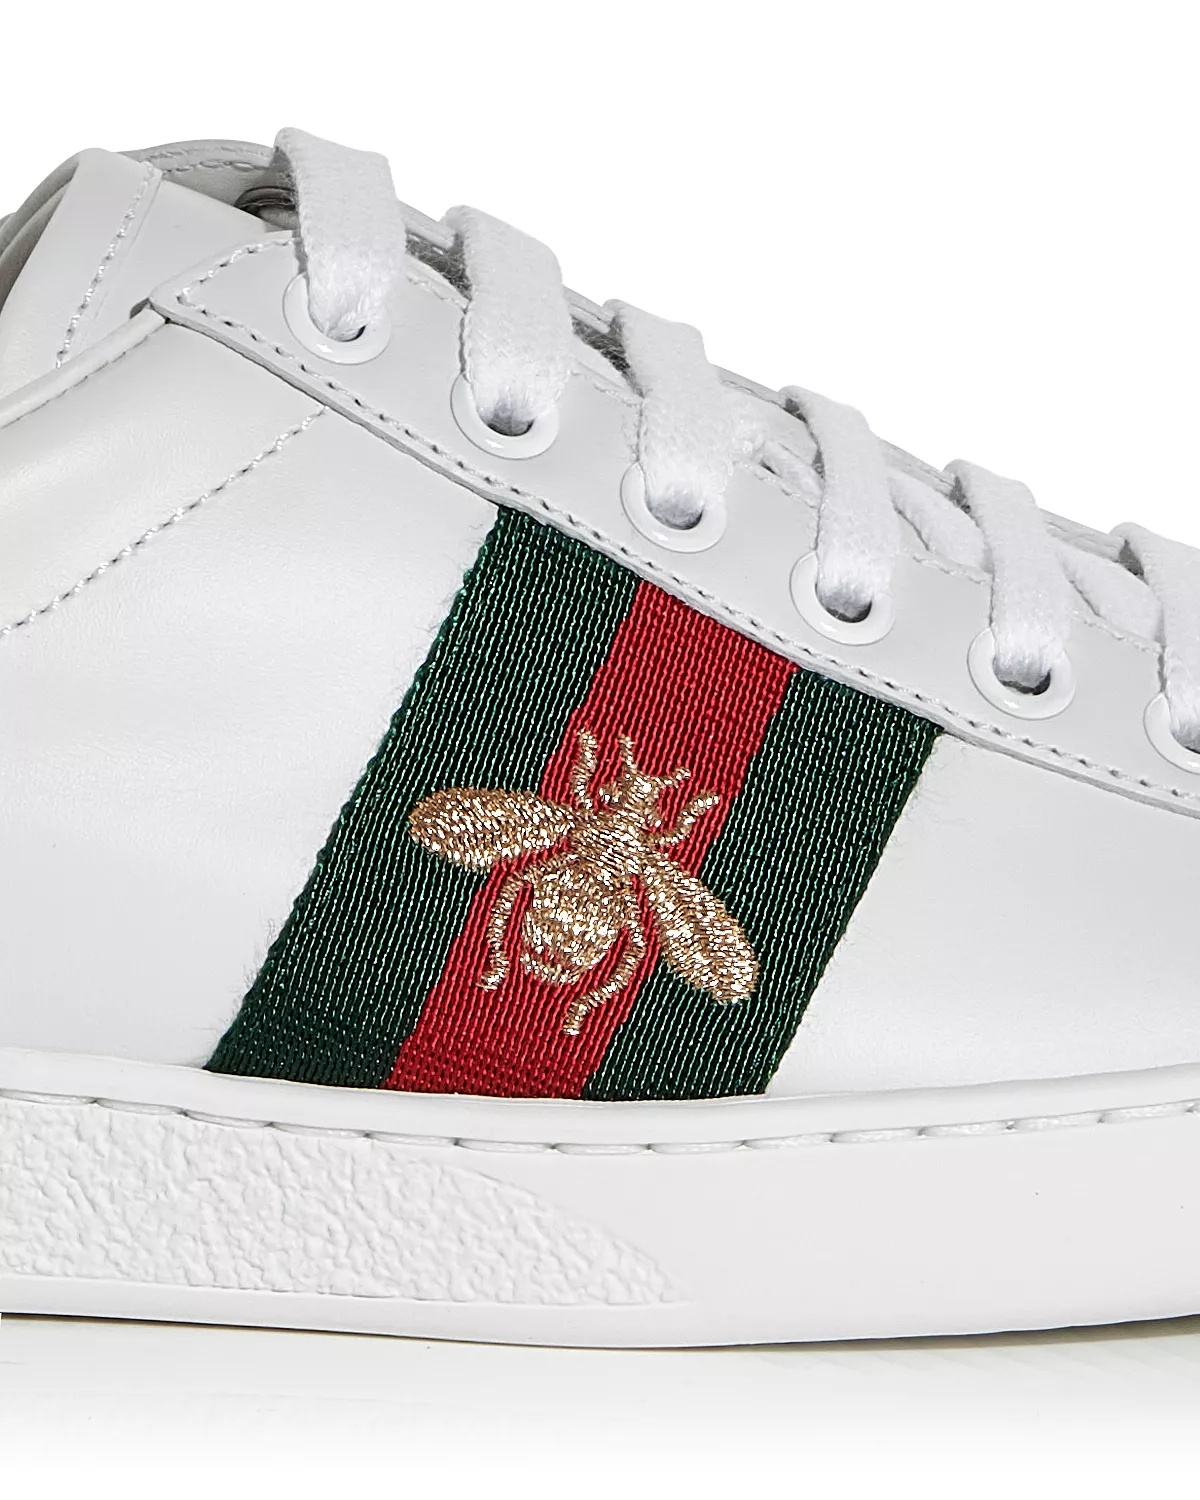 Women's Gucci Ace Embroidered Sneakers - 6